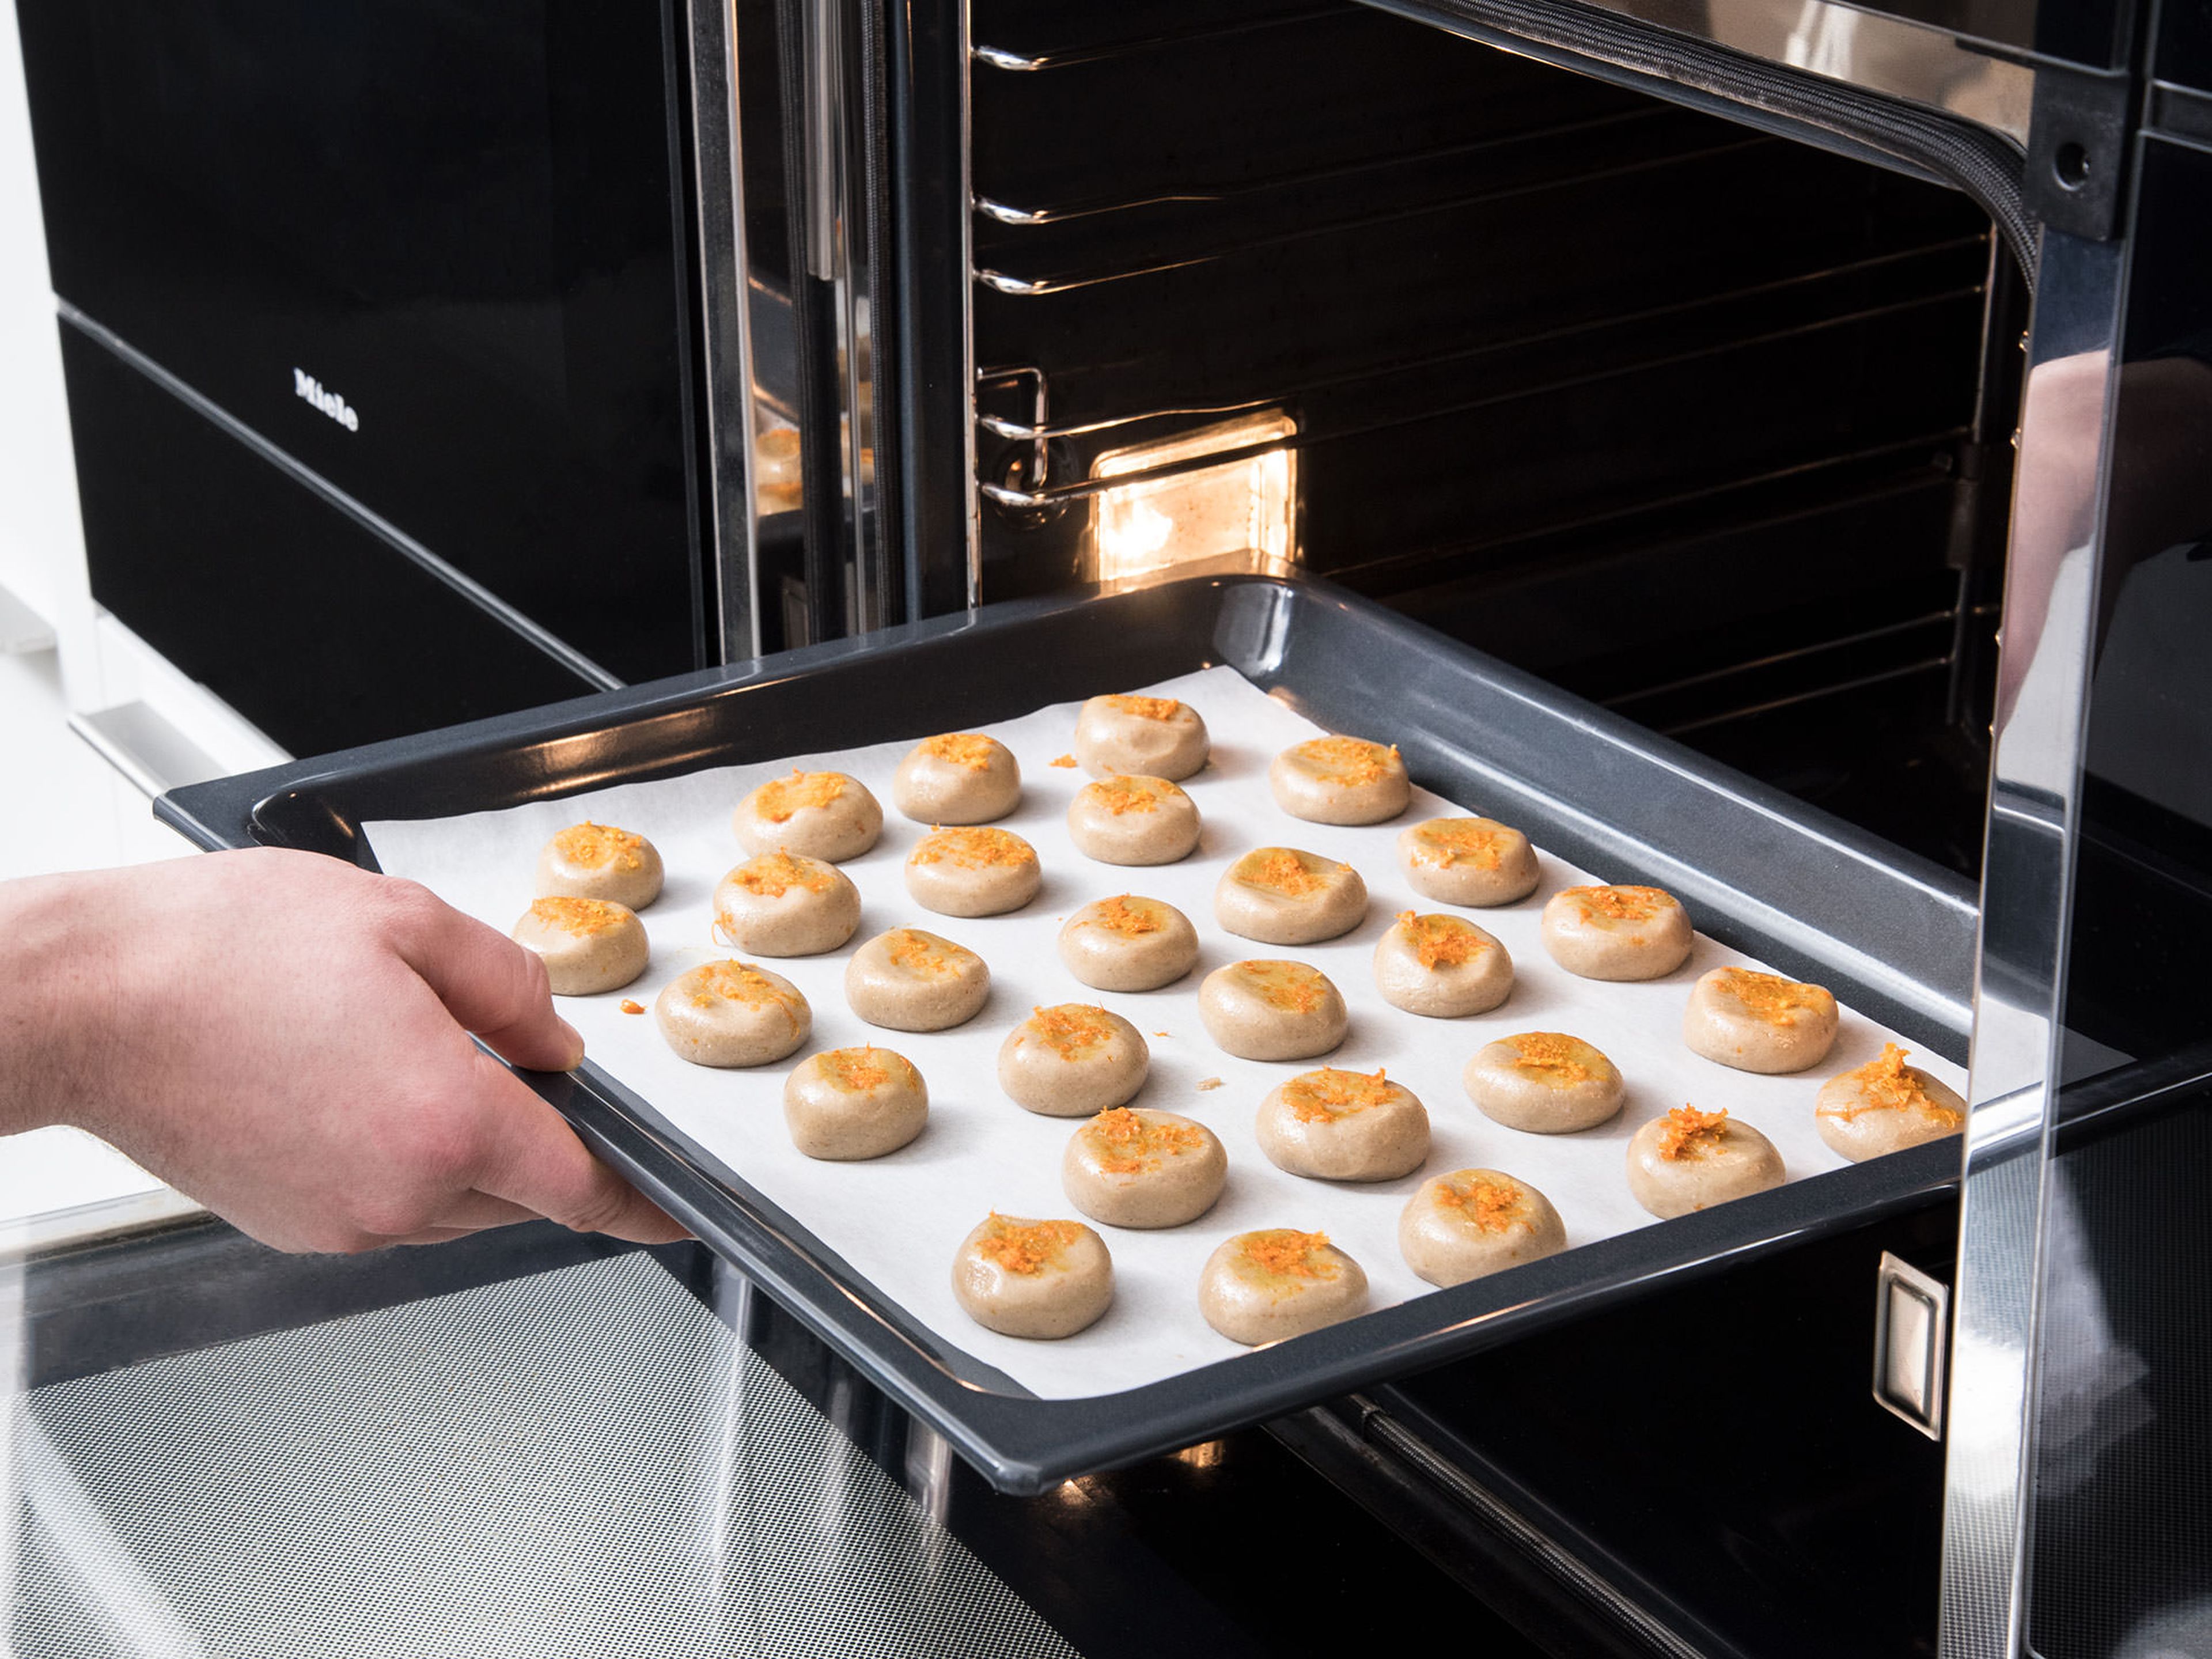 Form the dough into small balls (2 cm/0.8 in). Place them onto a parchment-lined baking sheet and press to flatten them slightly. Sprinkle remaining orange zest on top, and bake at 180°C/350°F for approx. 10 min. Enjoy!